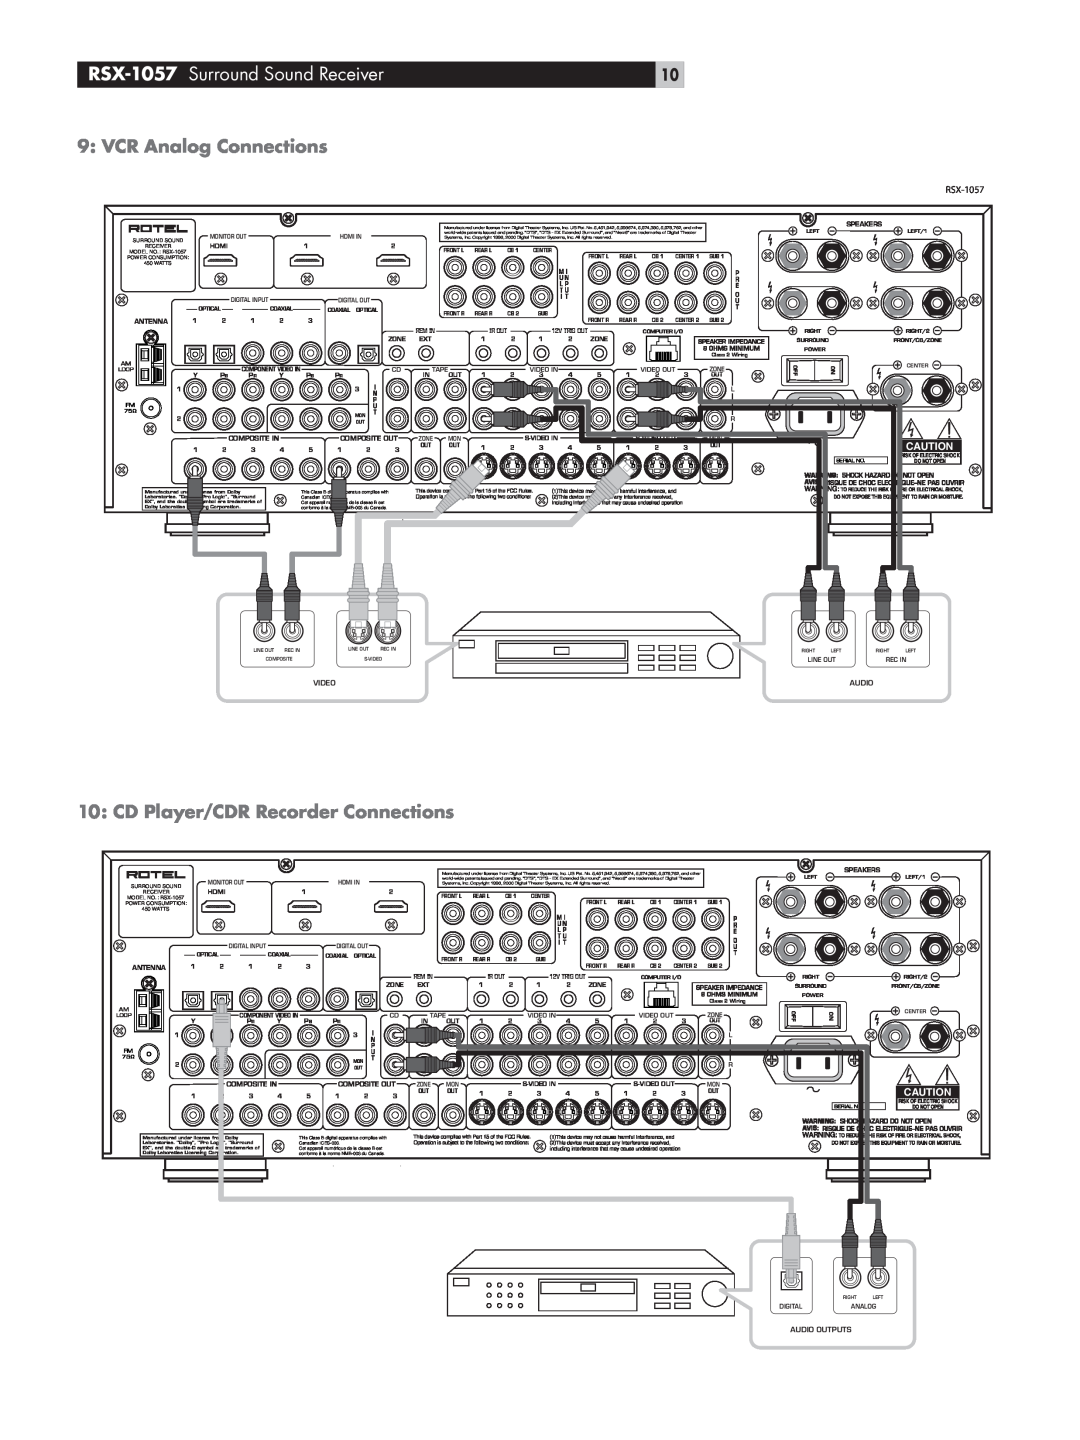 Rotel owner manual 9: VCR Analog Connections, 10: CD Player/CDR Recorder Connections, RSX-1057 Surround Sound Receiver 